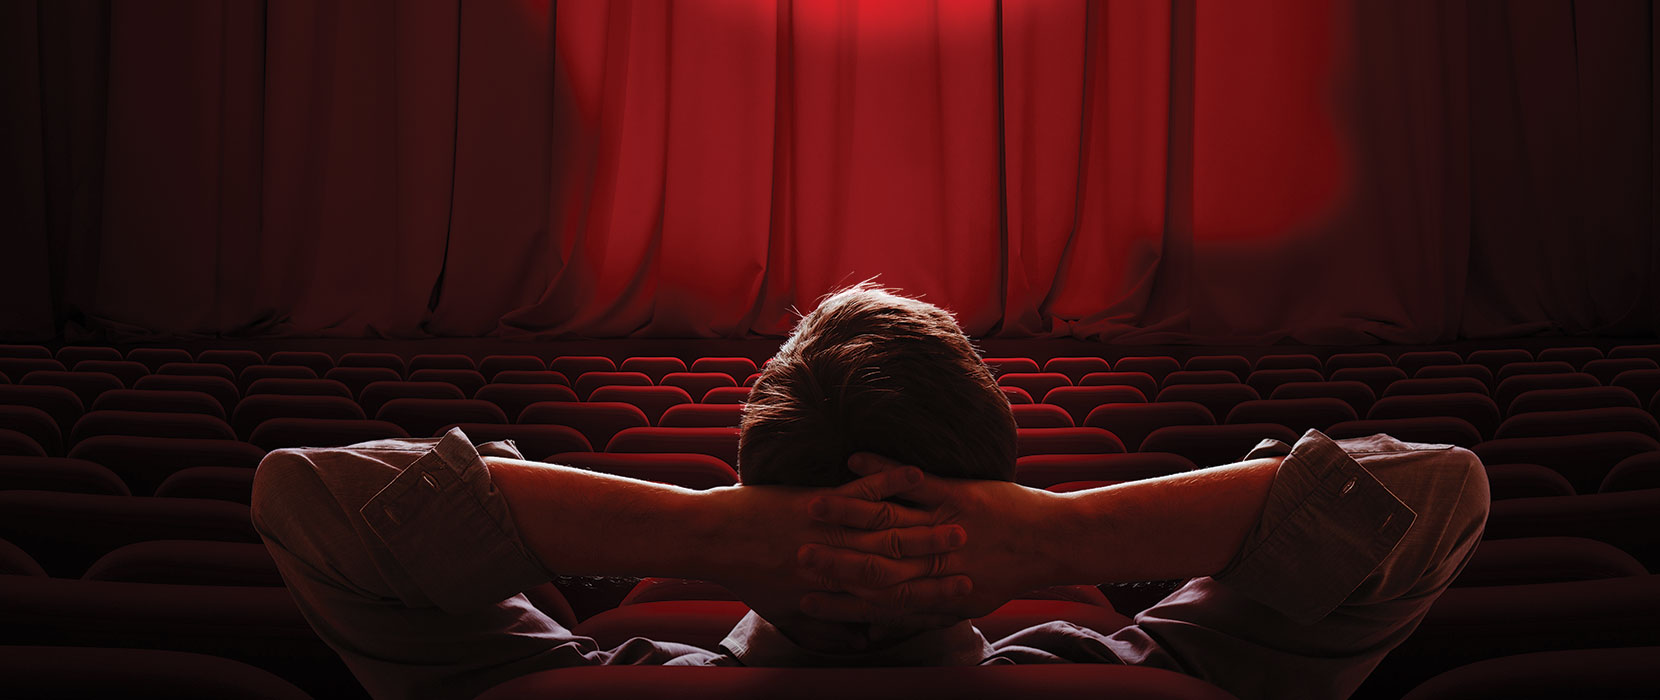 Theatre with red curtain pulled over a stage, with a sole man sitting in the audience with his hands behind his head, as if ready to enjoy a show.